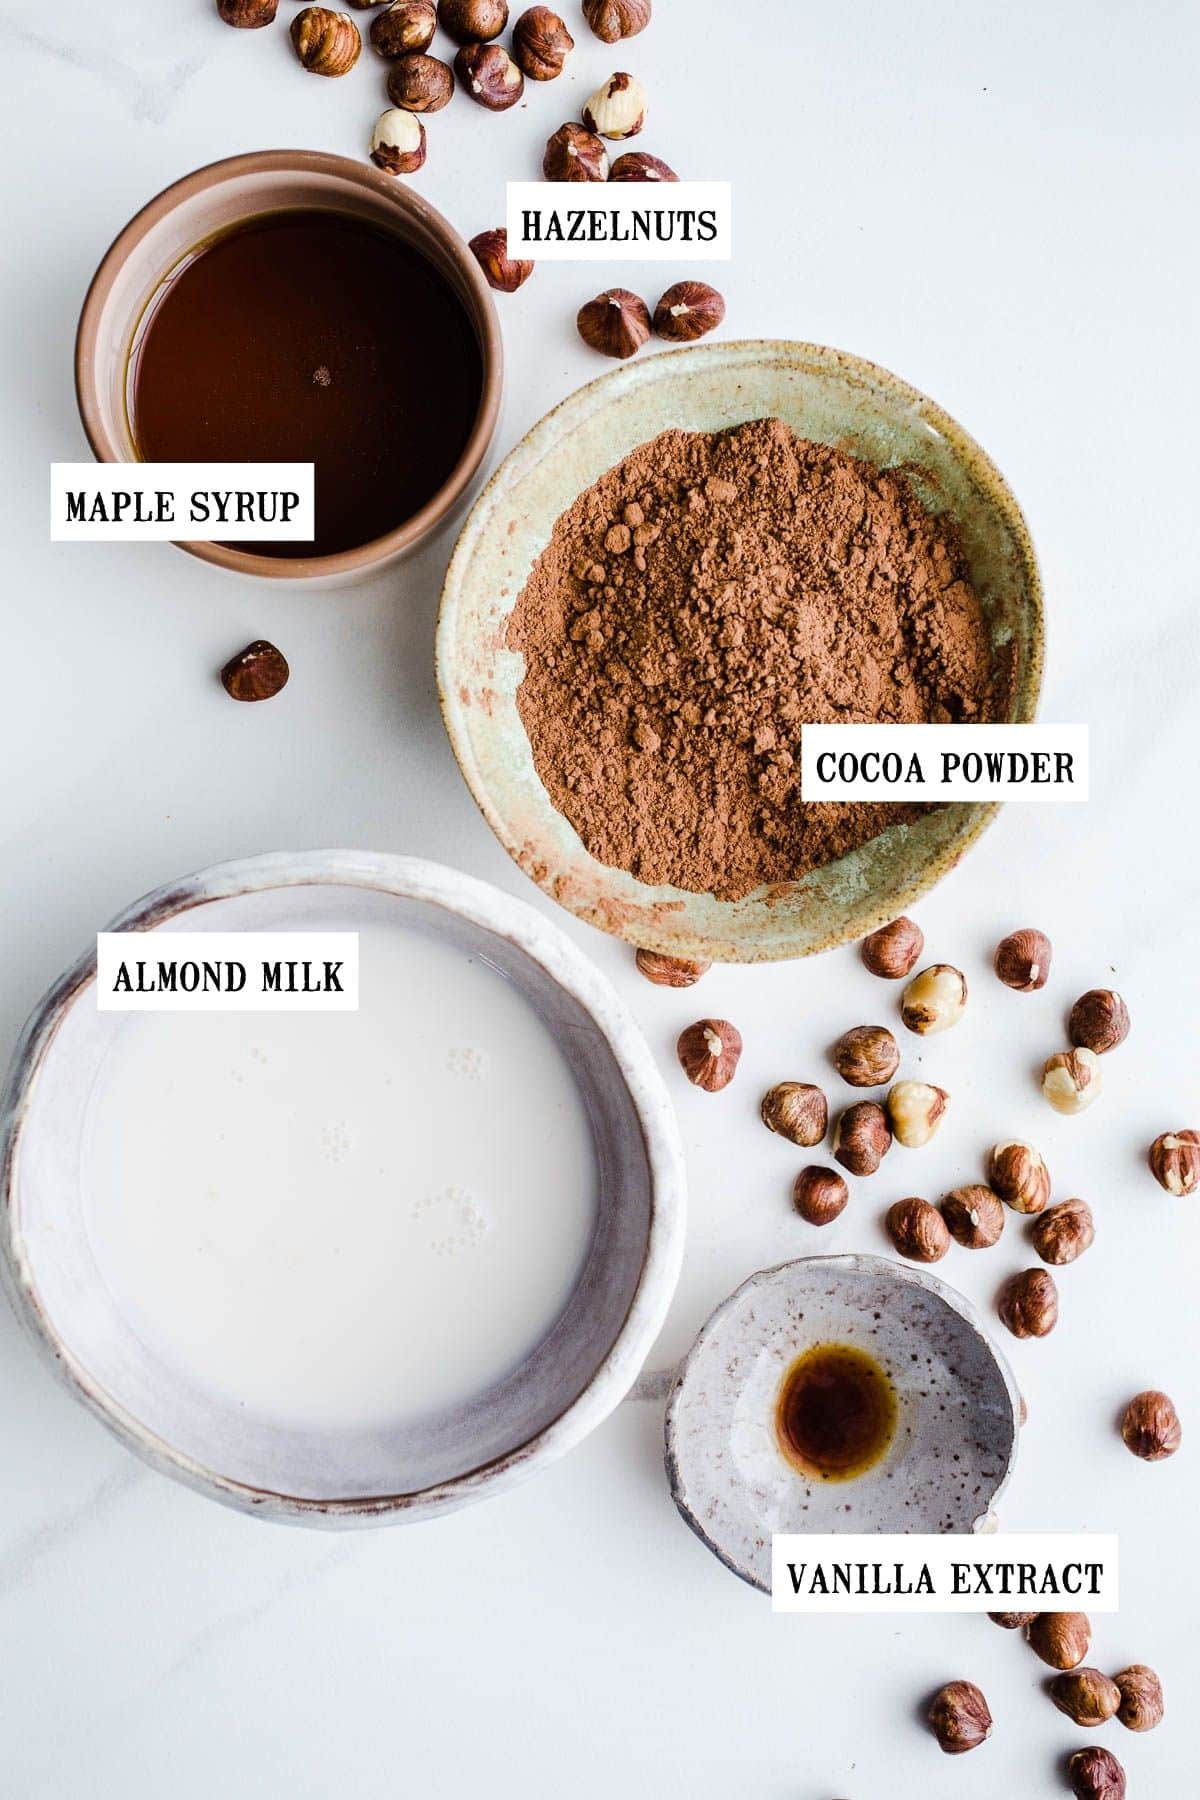 Ingredients in small bowls to make hazelnut butter.